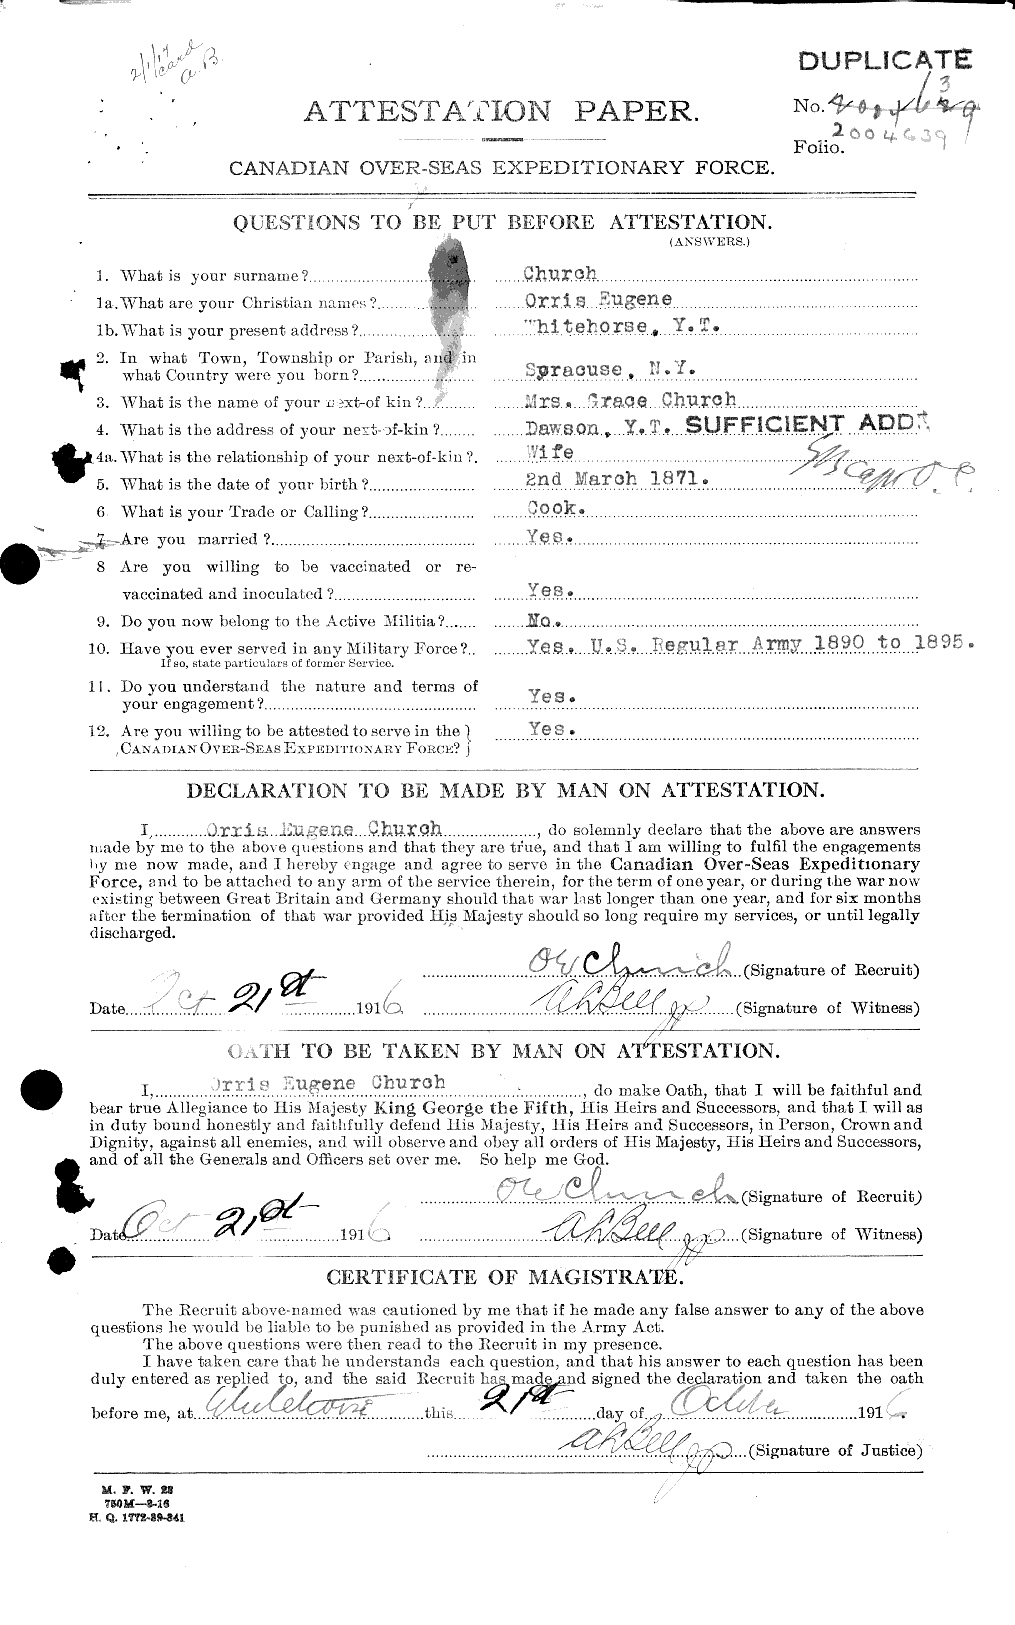 Personnel Records of the First World War - CEF 022370a